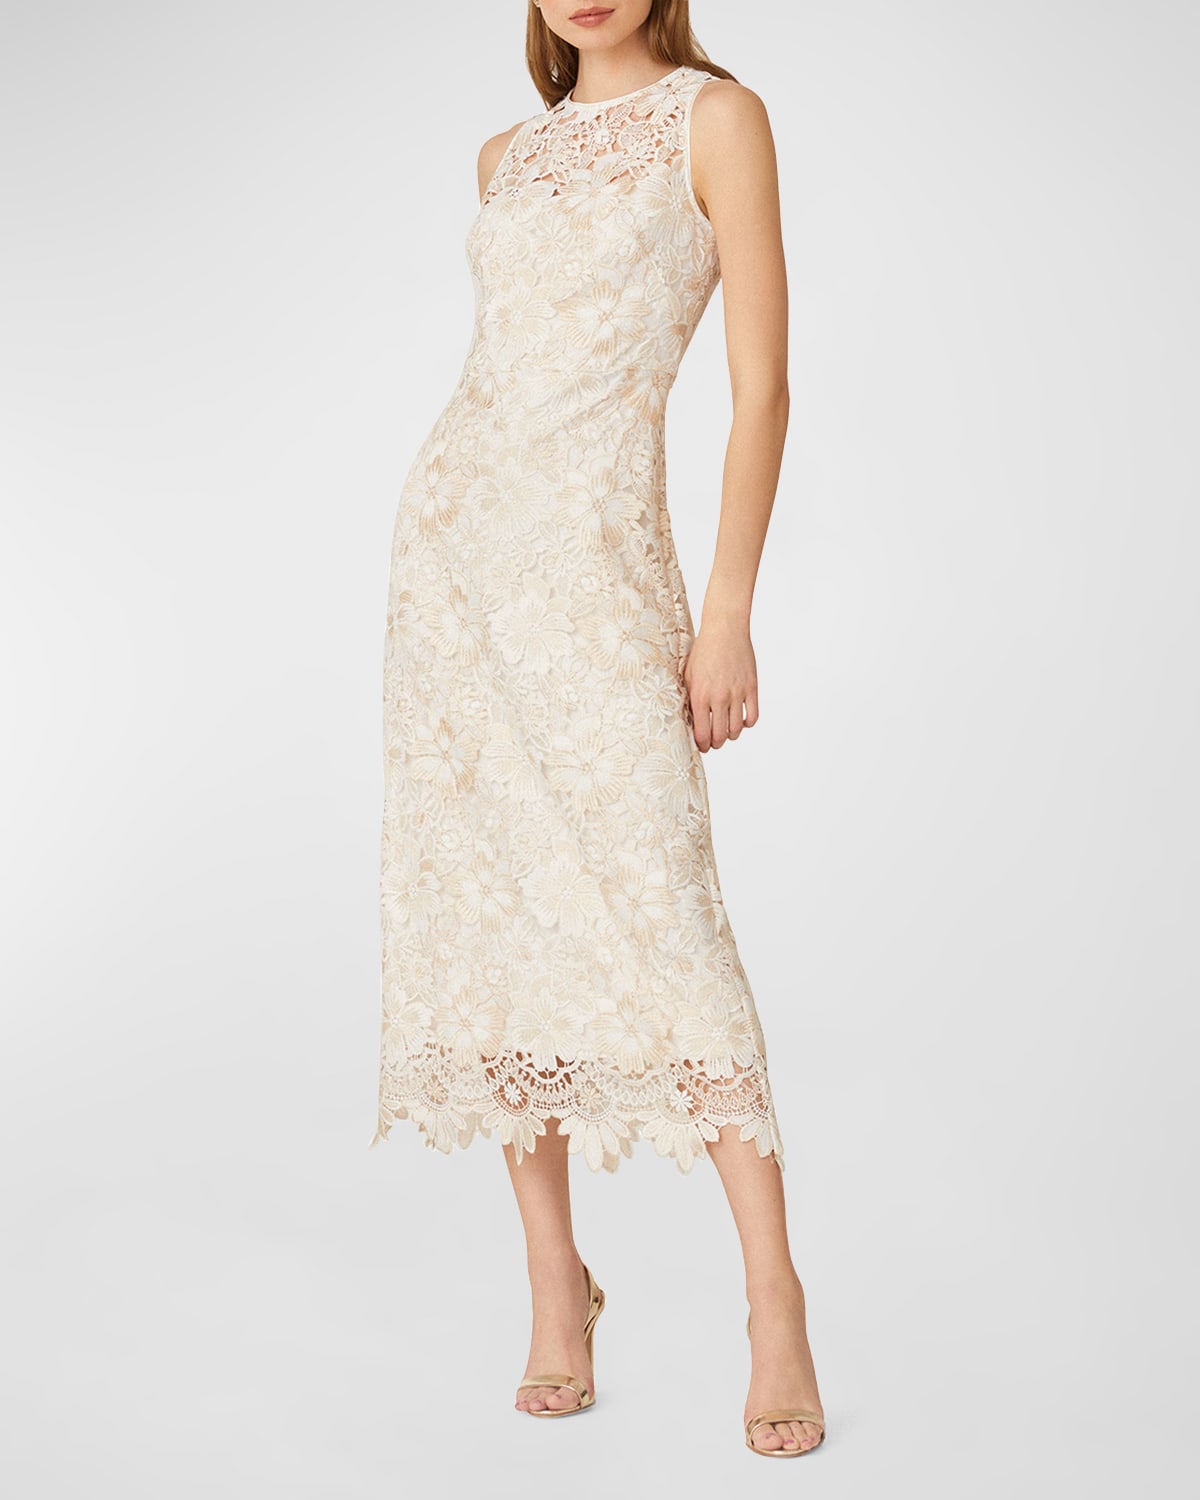 Shoshanna Sleeveless Floral Lace A-line Midi Dress In Ivory Multi